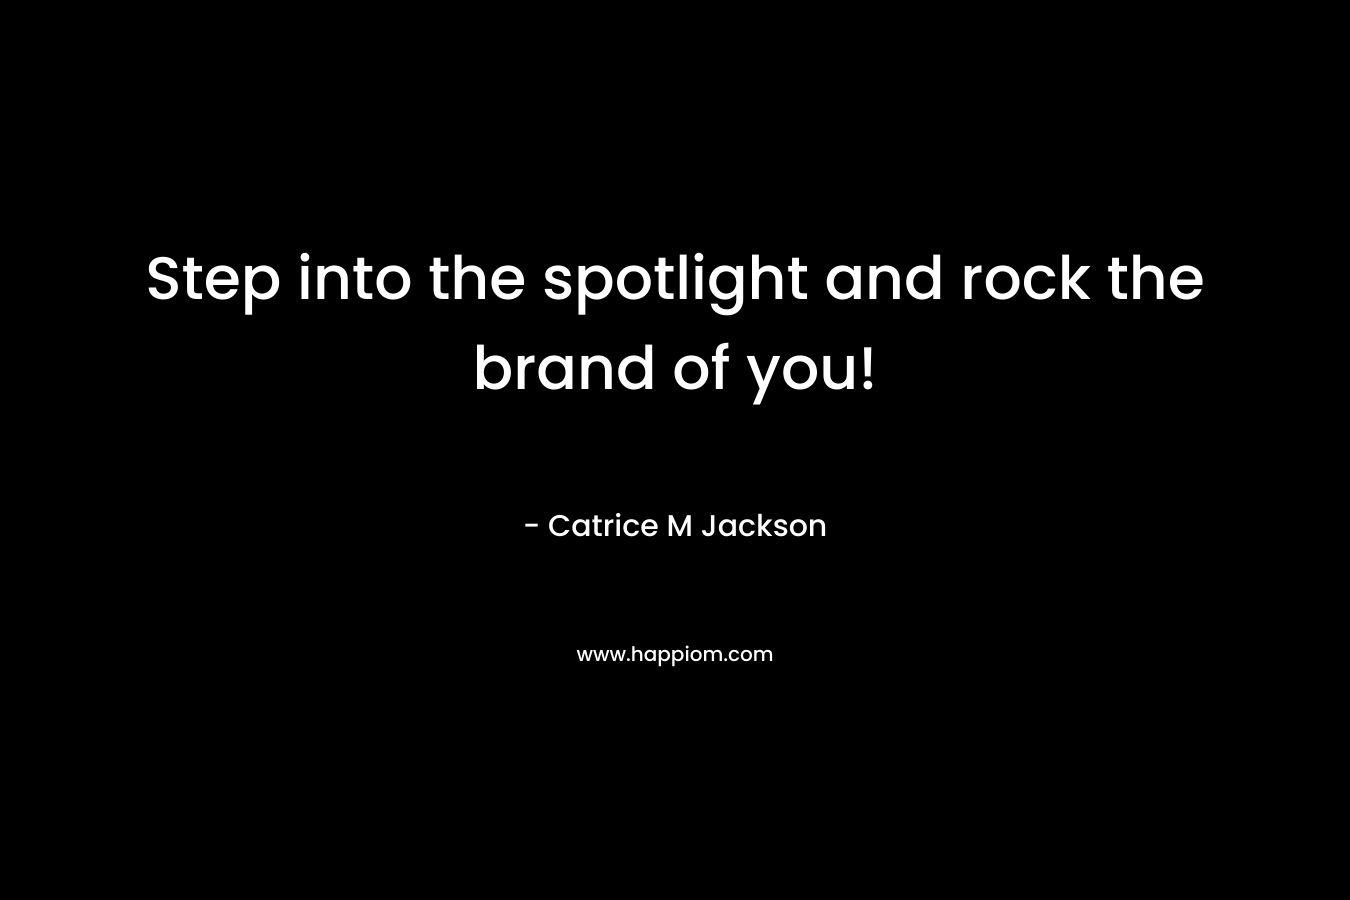 Step into the spotlight and rock the brand of you! – Catrice M Jackson